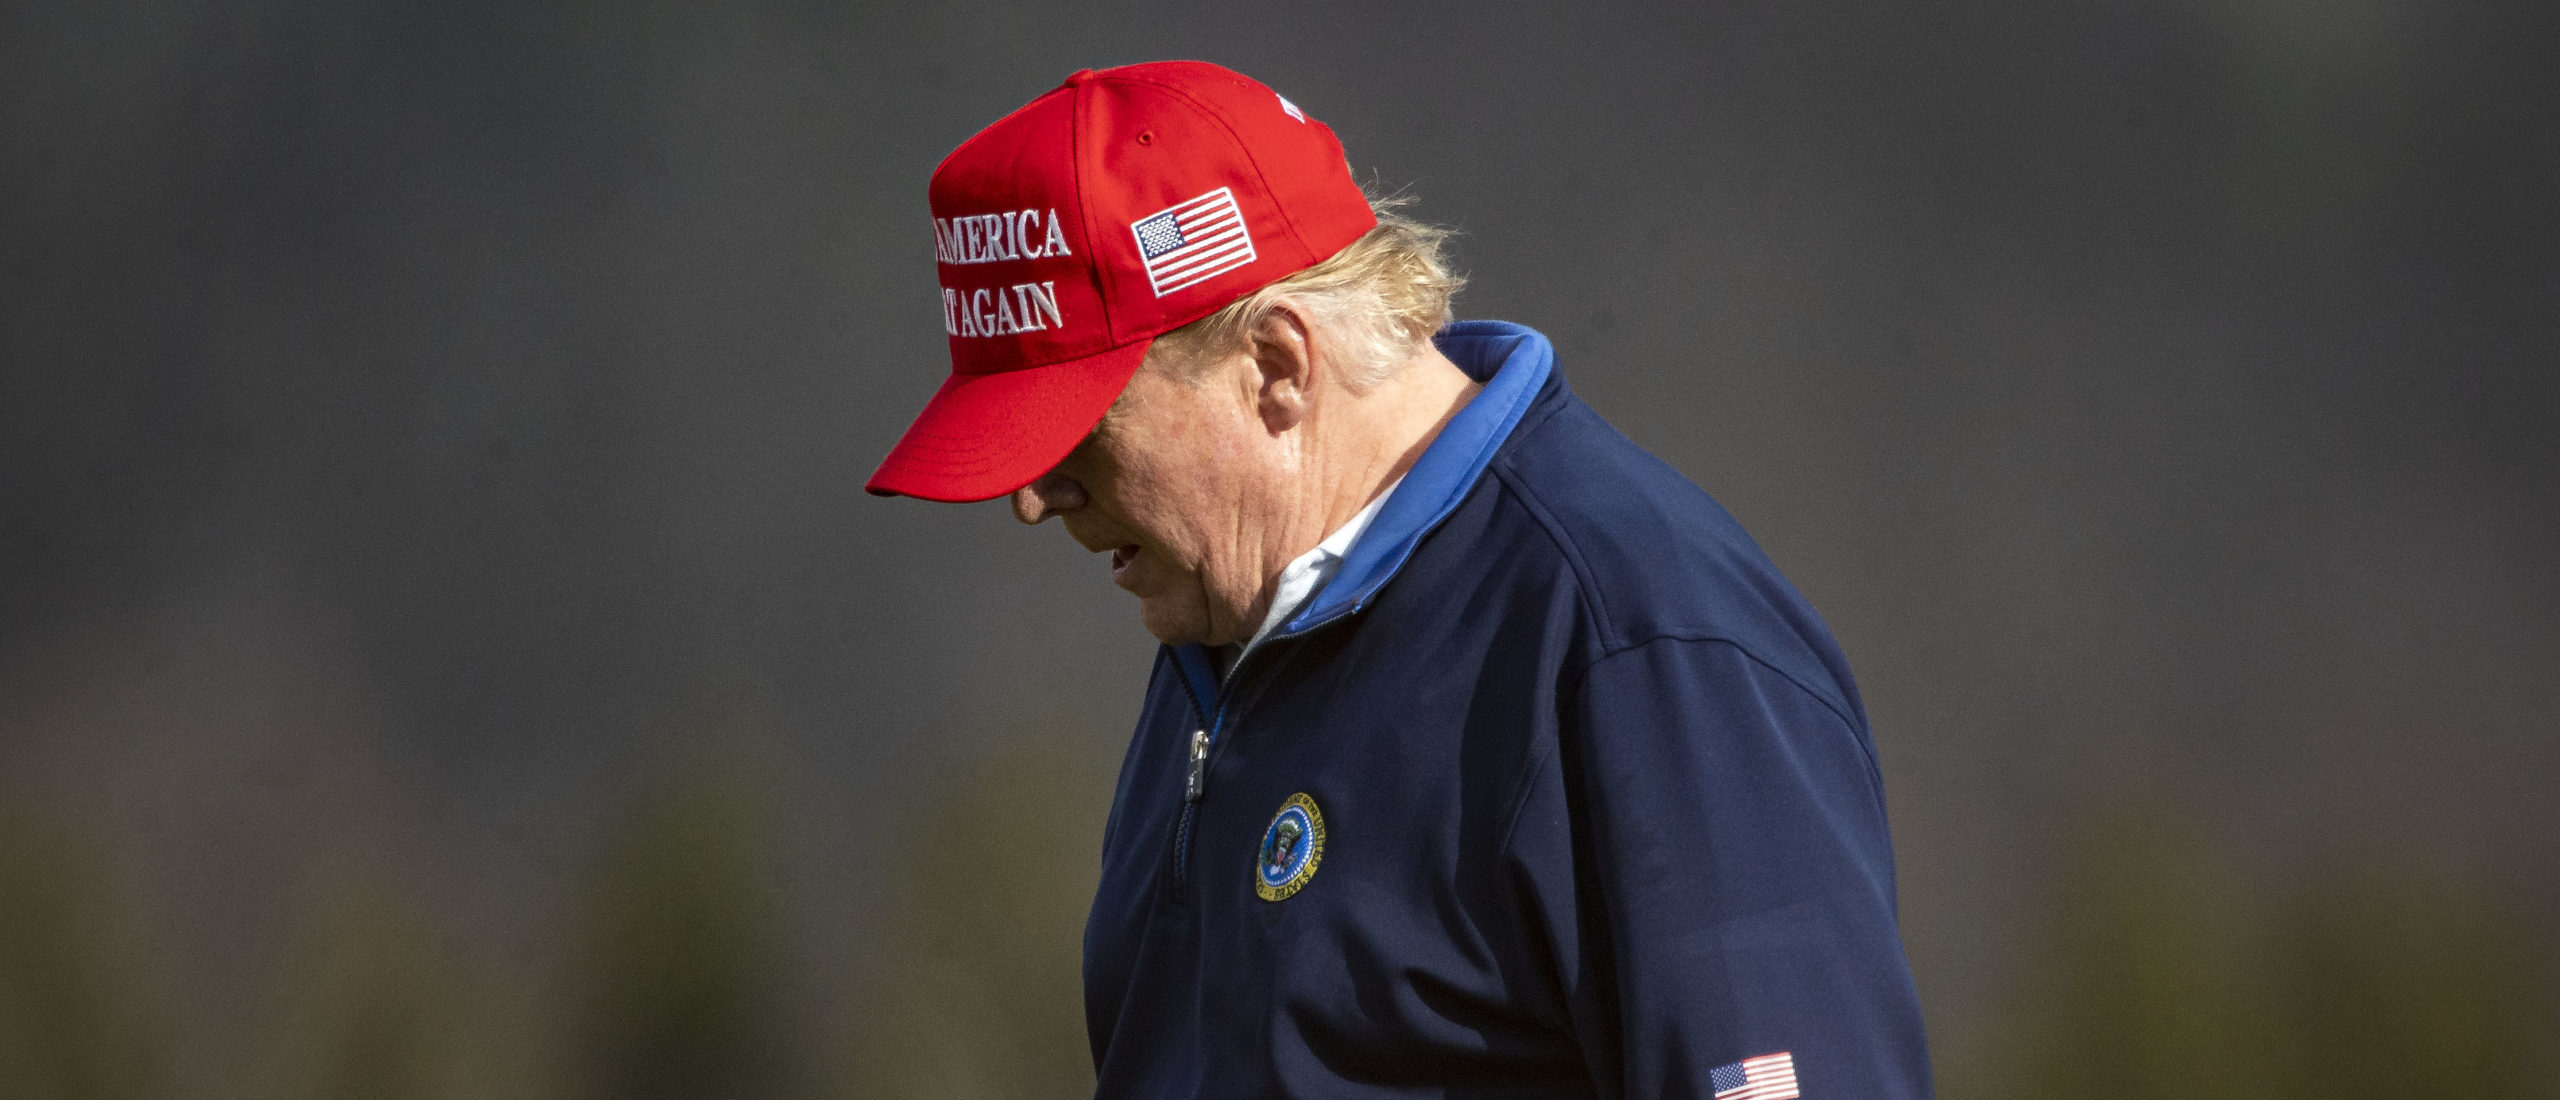 U.S. President Donald Trump golfs at Trump National Golf Club on December 13, 2020 in Sterling, Virginia. (Photo by Al Drago/Getty Images)